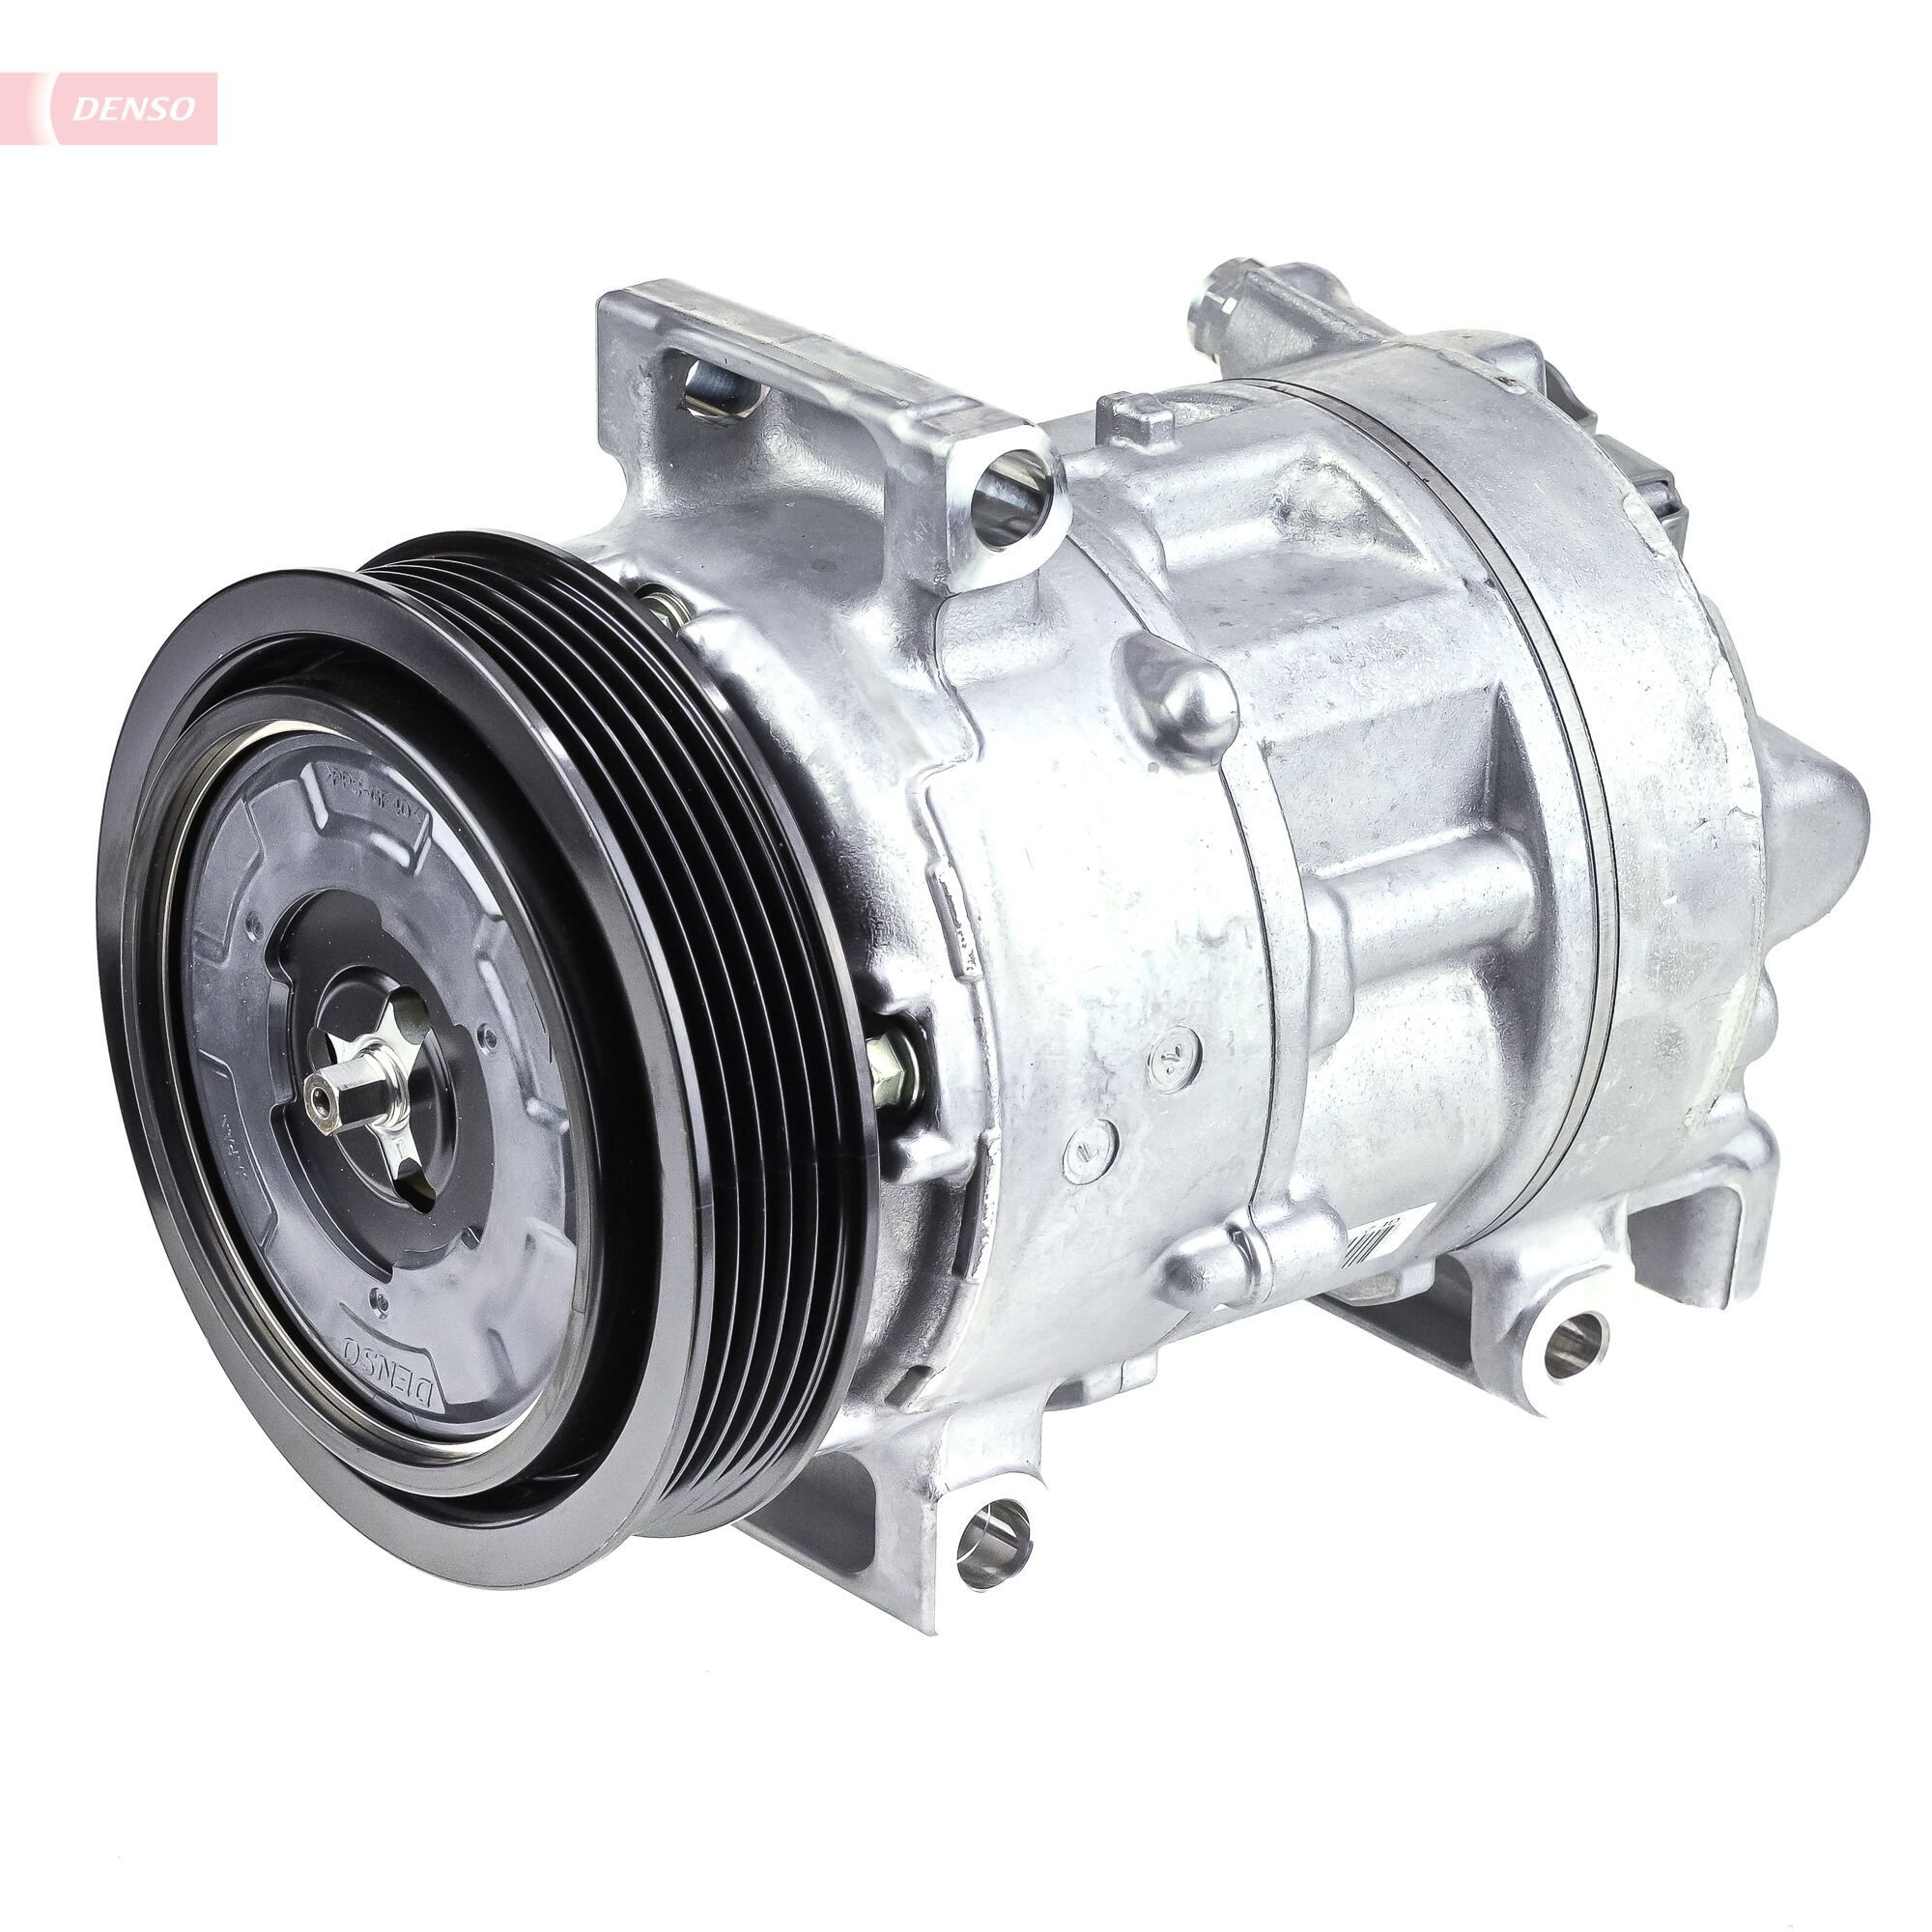 Compressor, air conditioning DENSO 5SE12C, PAG 46, R 134a DCP50314 ▷  AUTODOC price and review